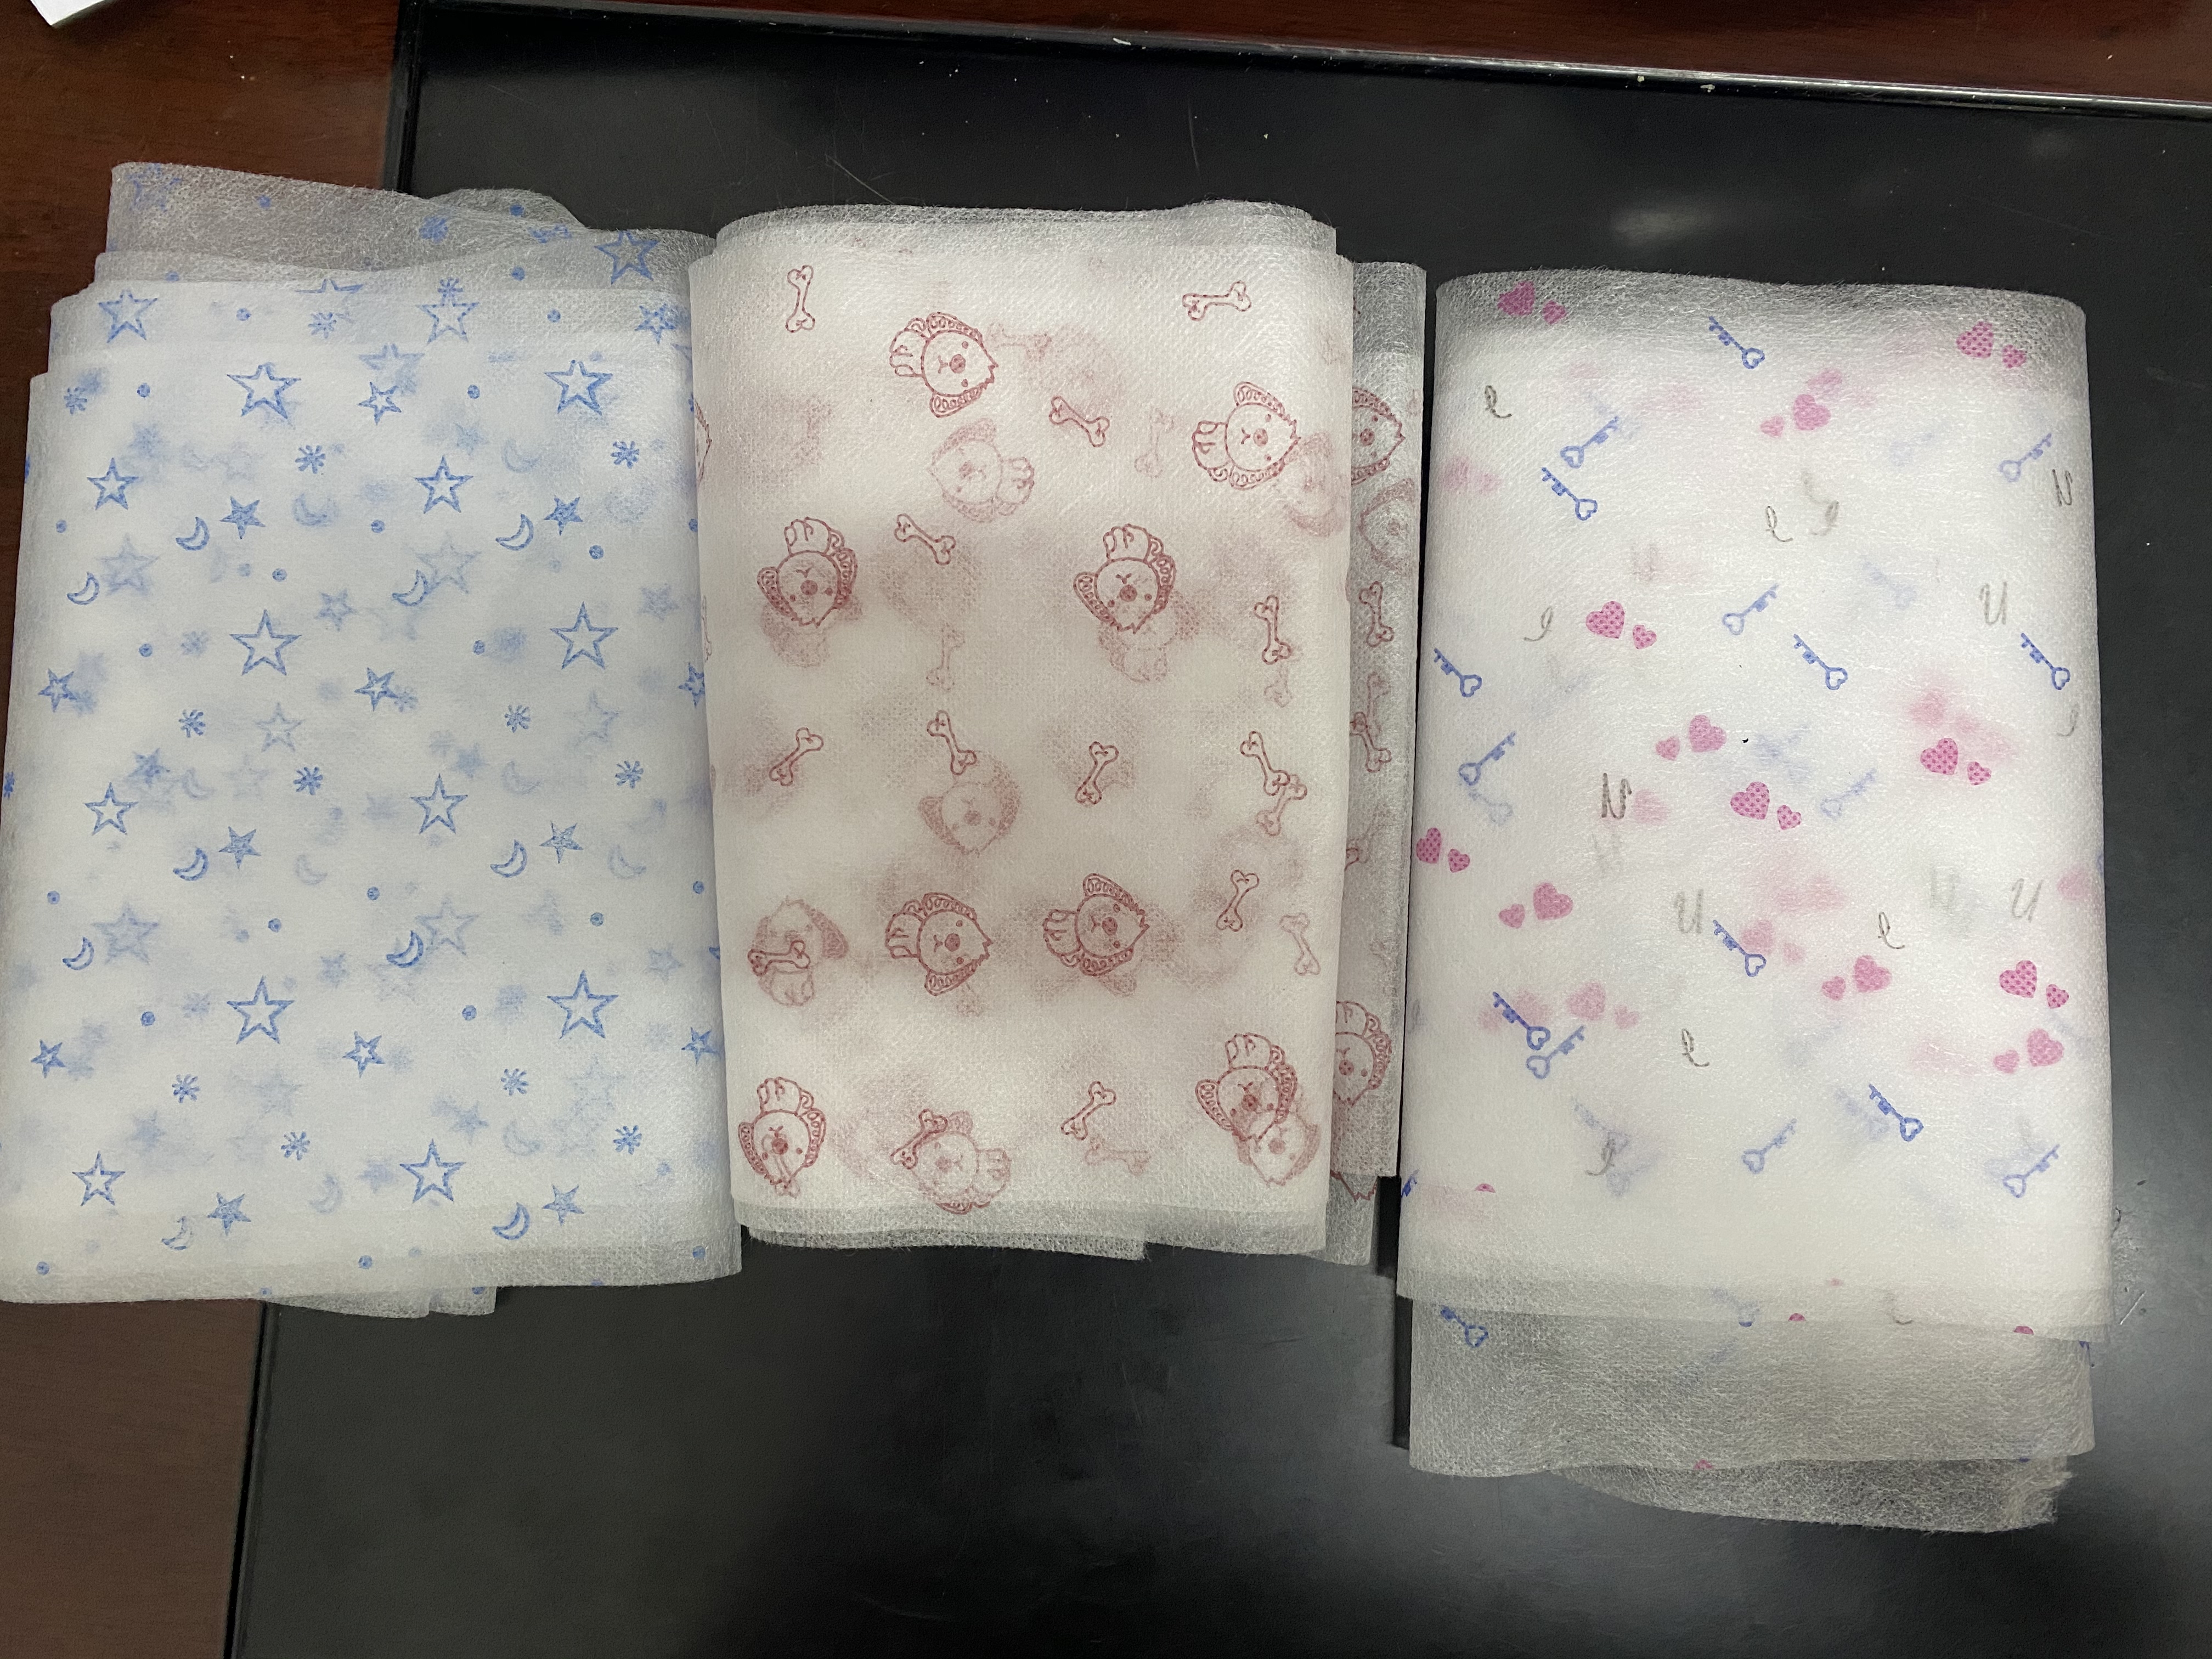  Facemask material fabric -printed pp nonwoven fabric